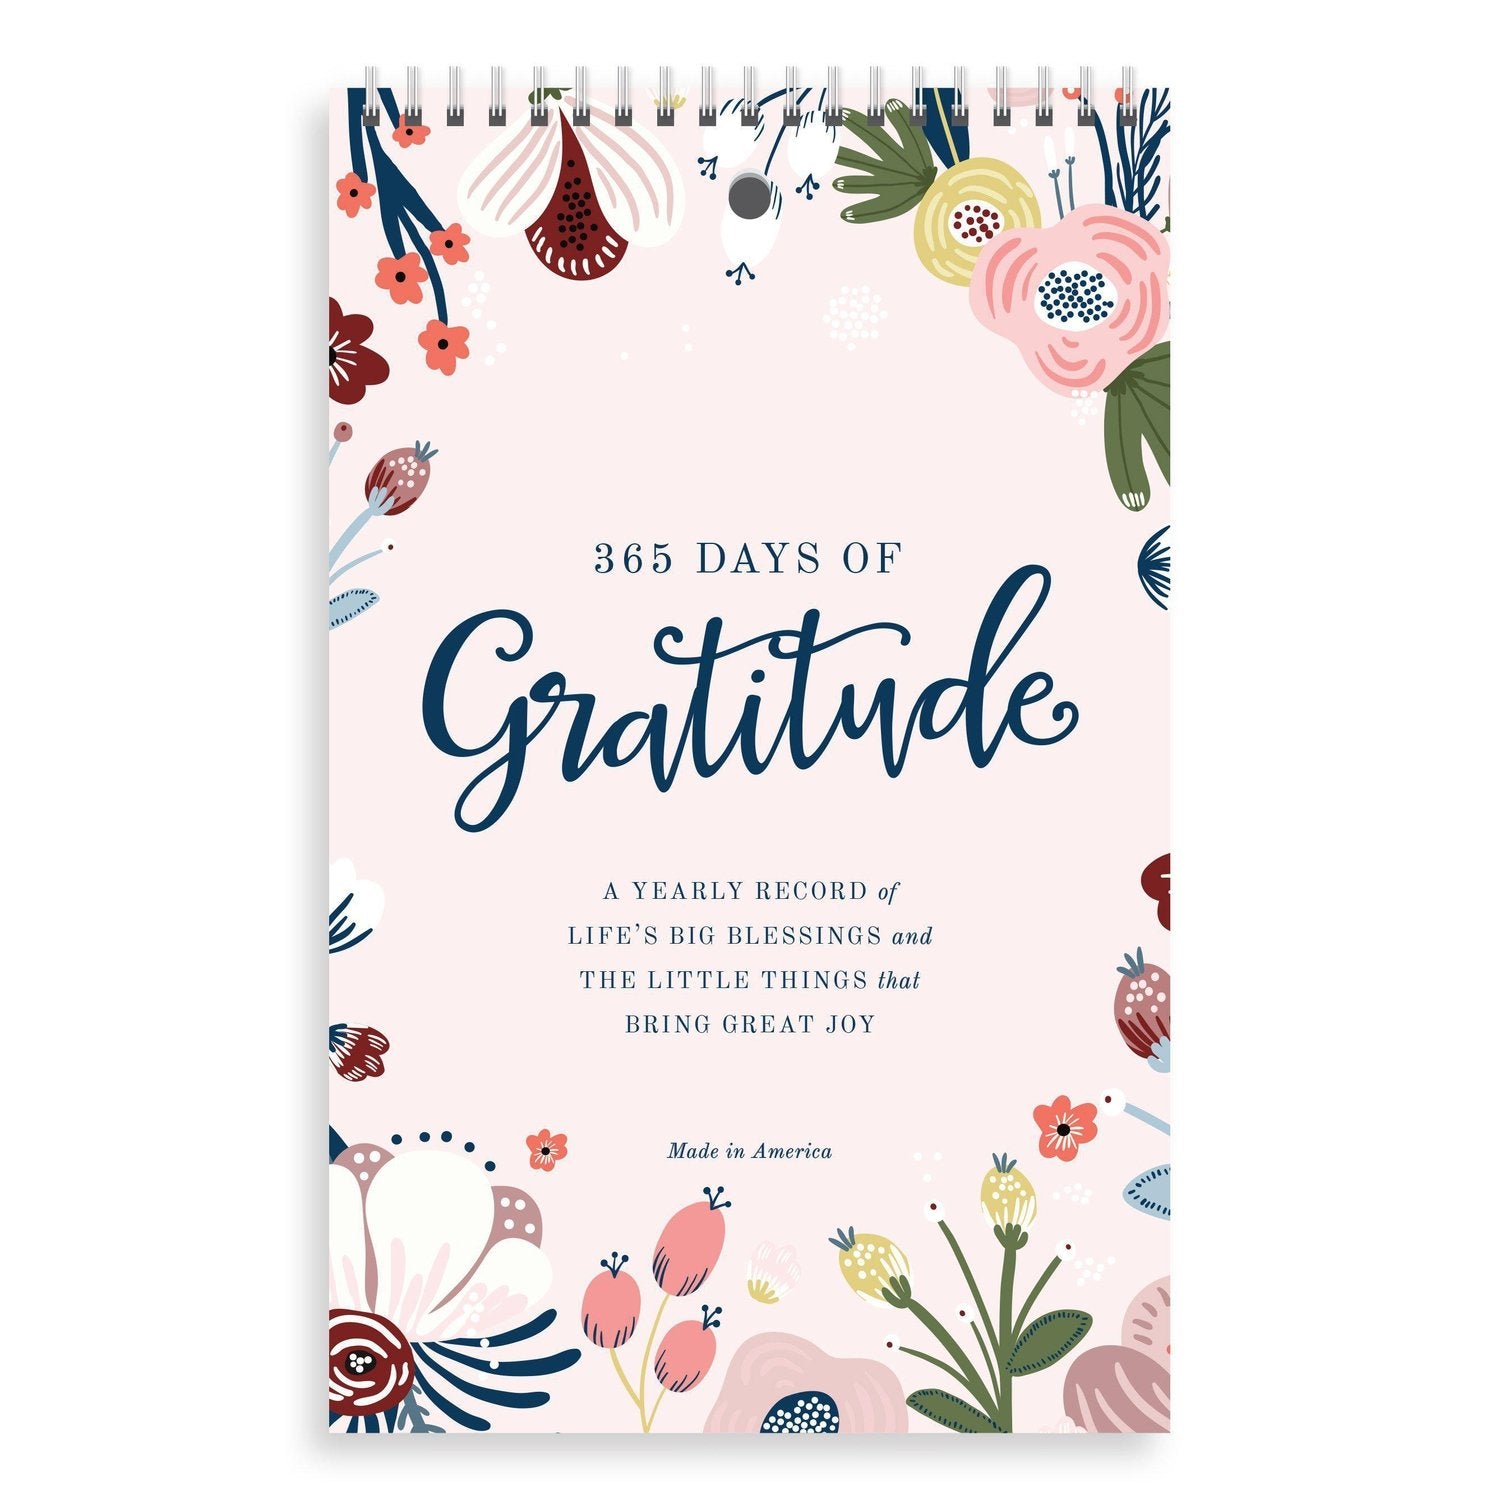 The Gratitude Journal by Day One